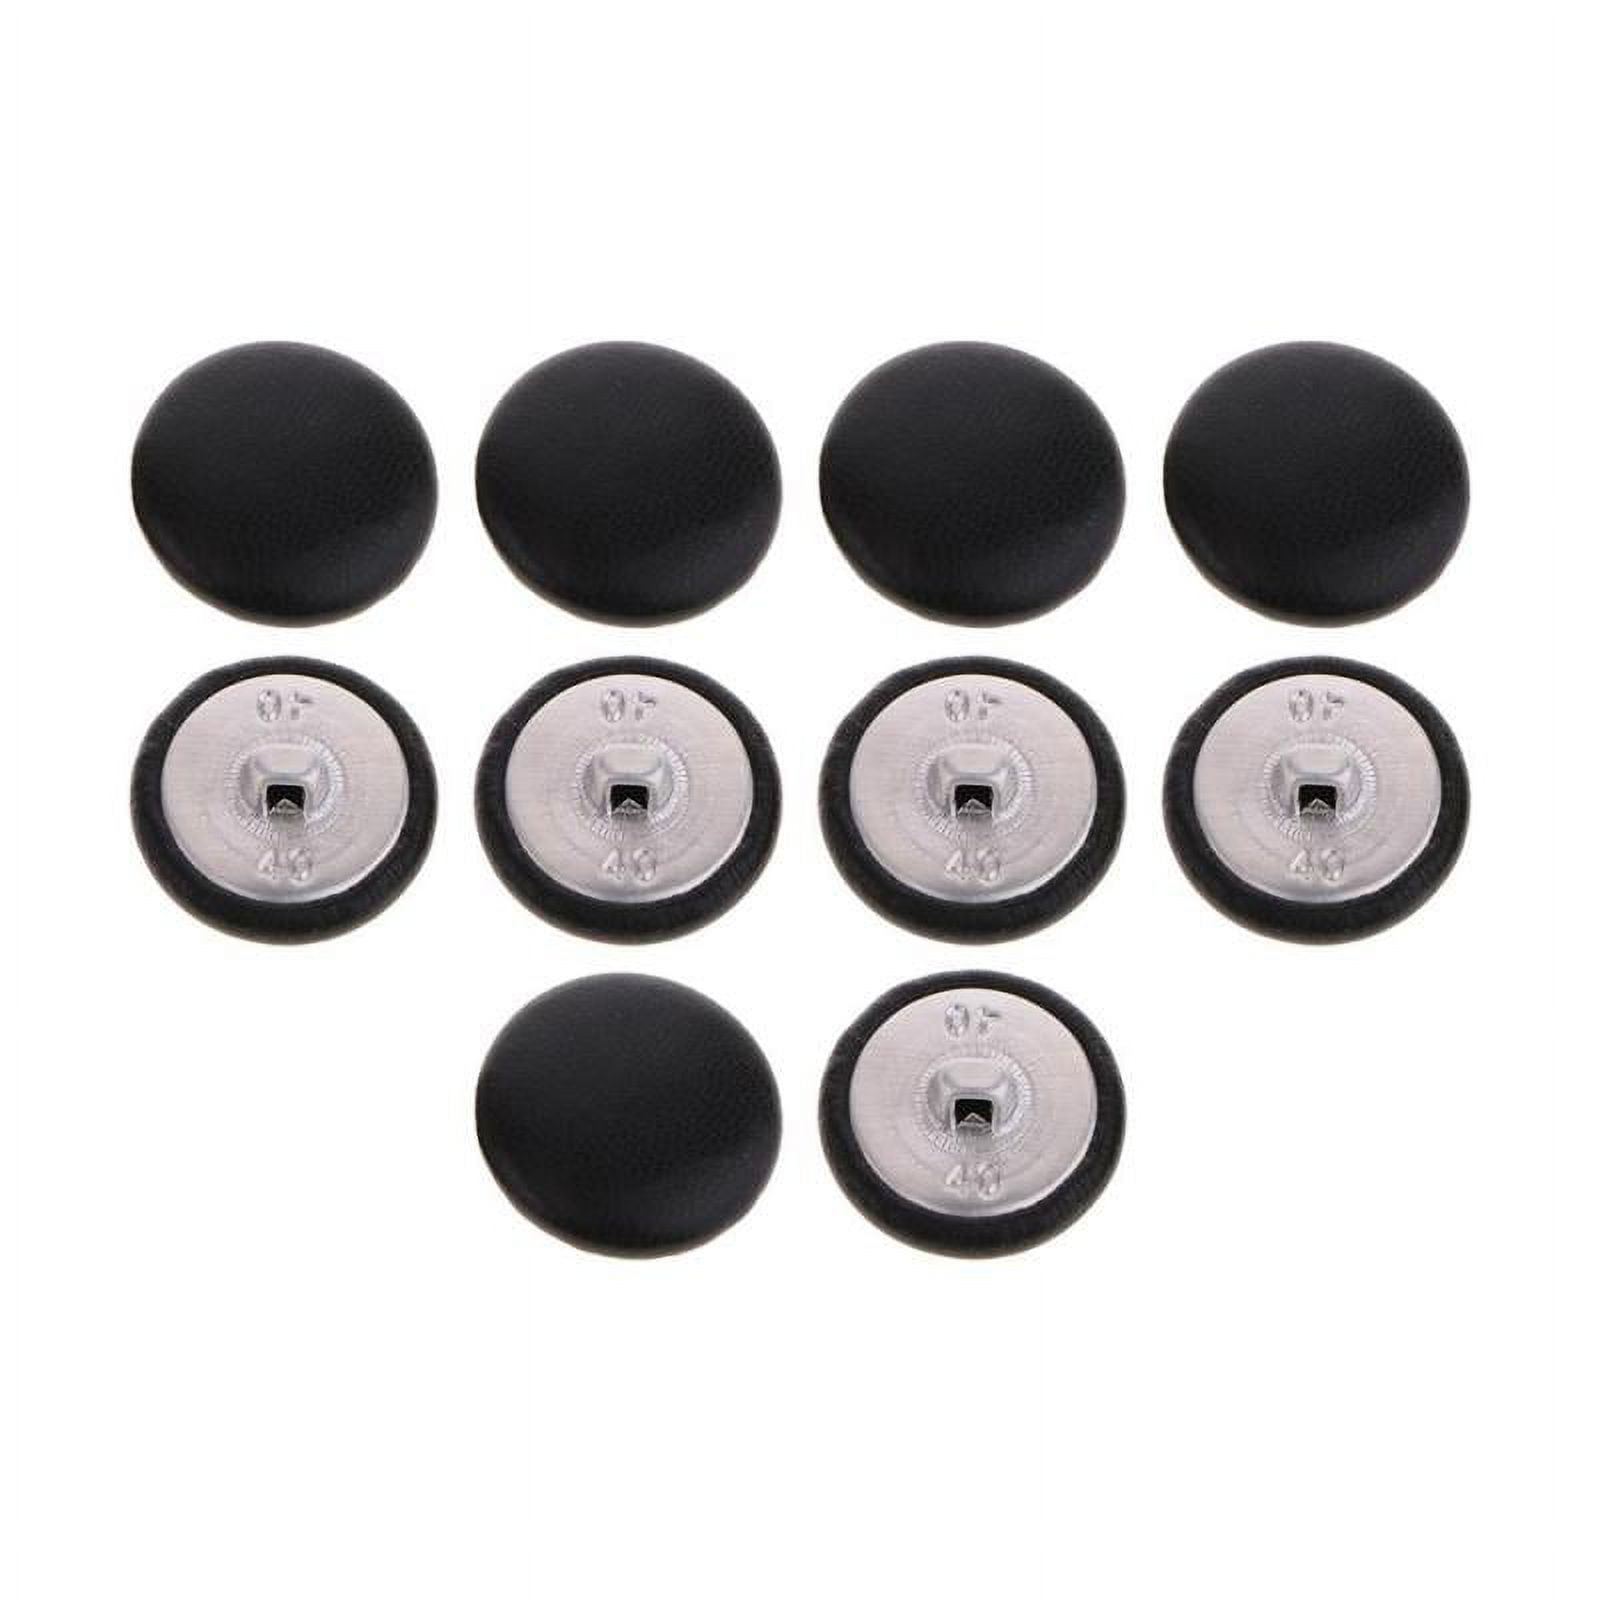 10x Artificial Leather Covered Upholstery Buttons Garments Sewing